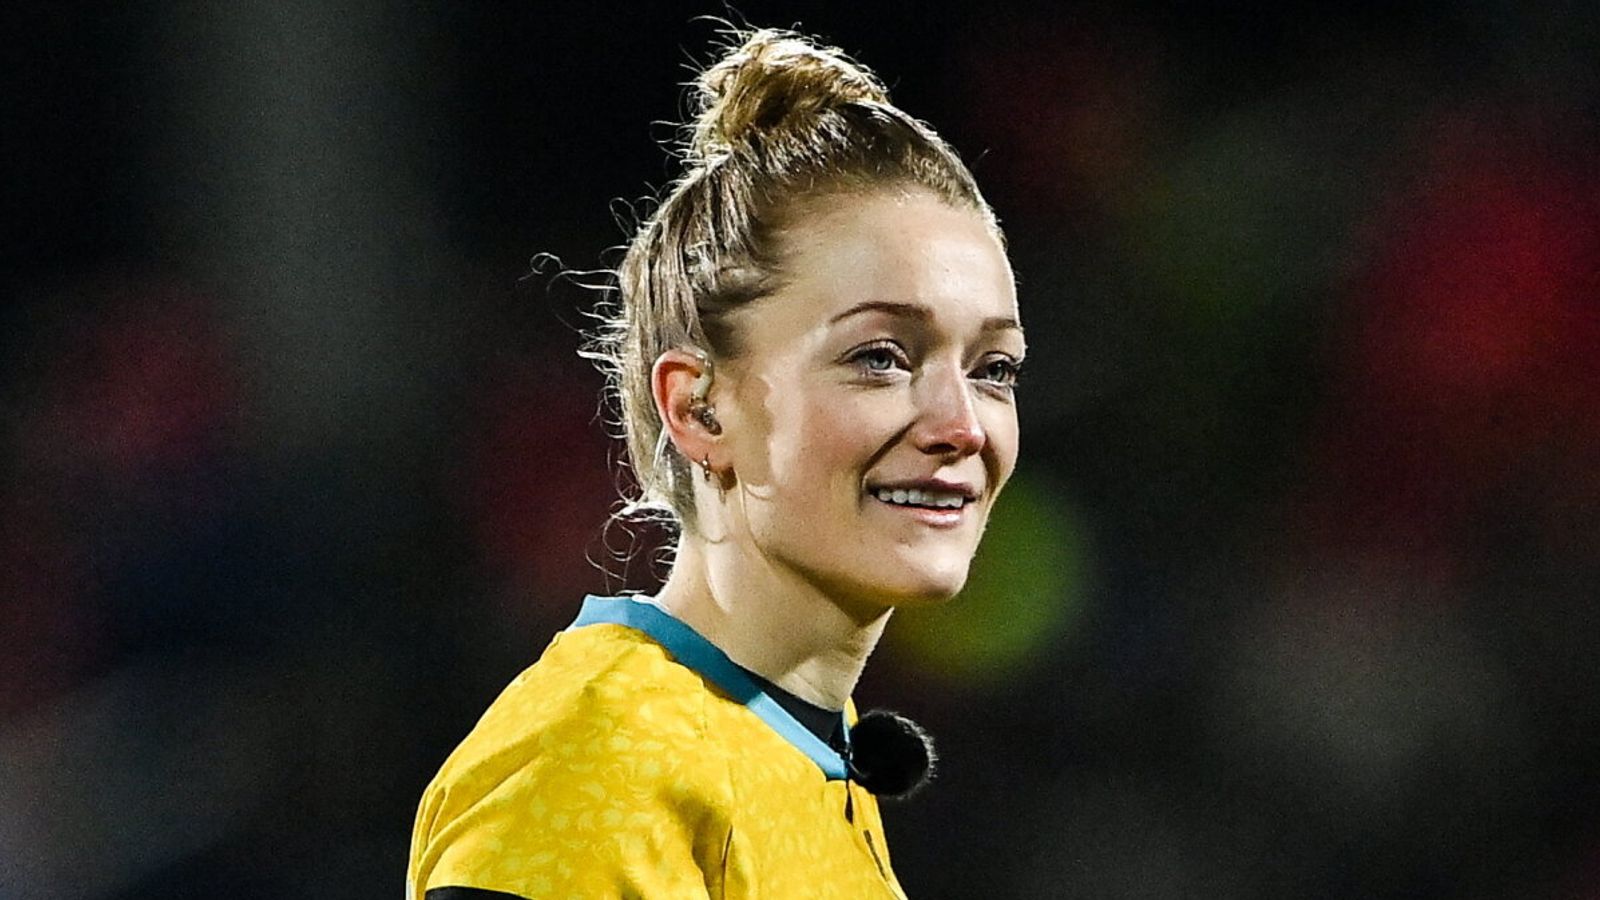 Scottish official Hollie Davidson to become first woman to referee men’s Six Nations side when Italy take on Portugal